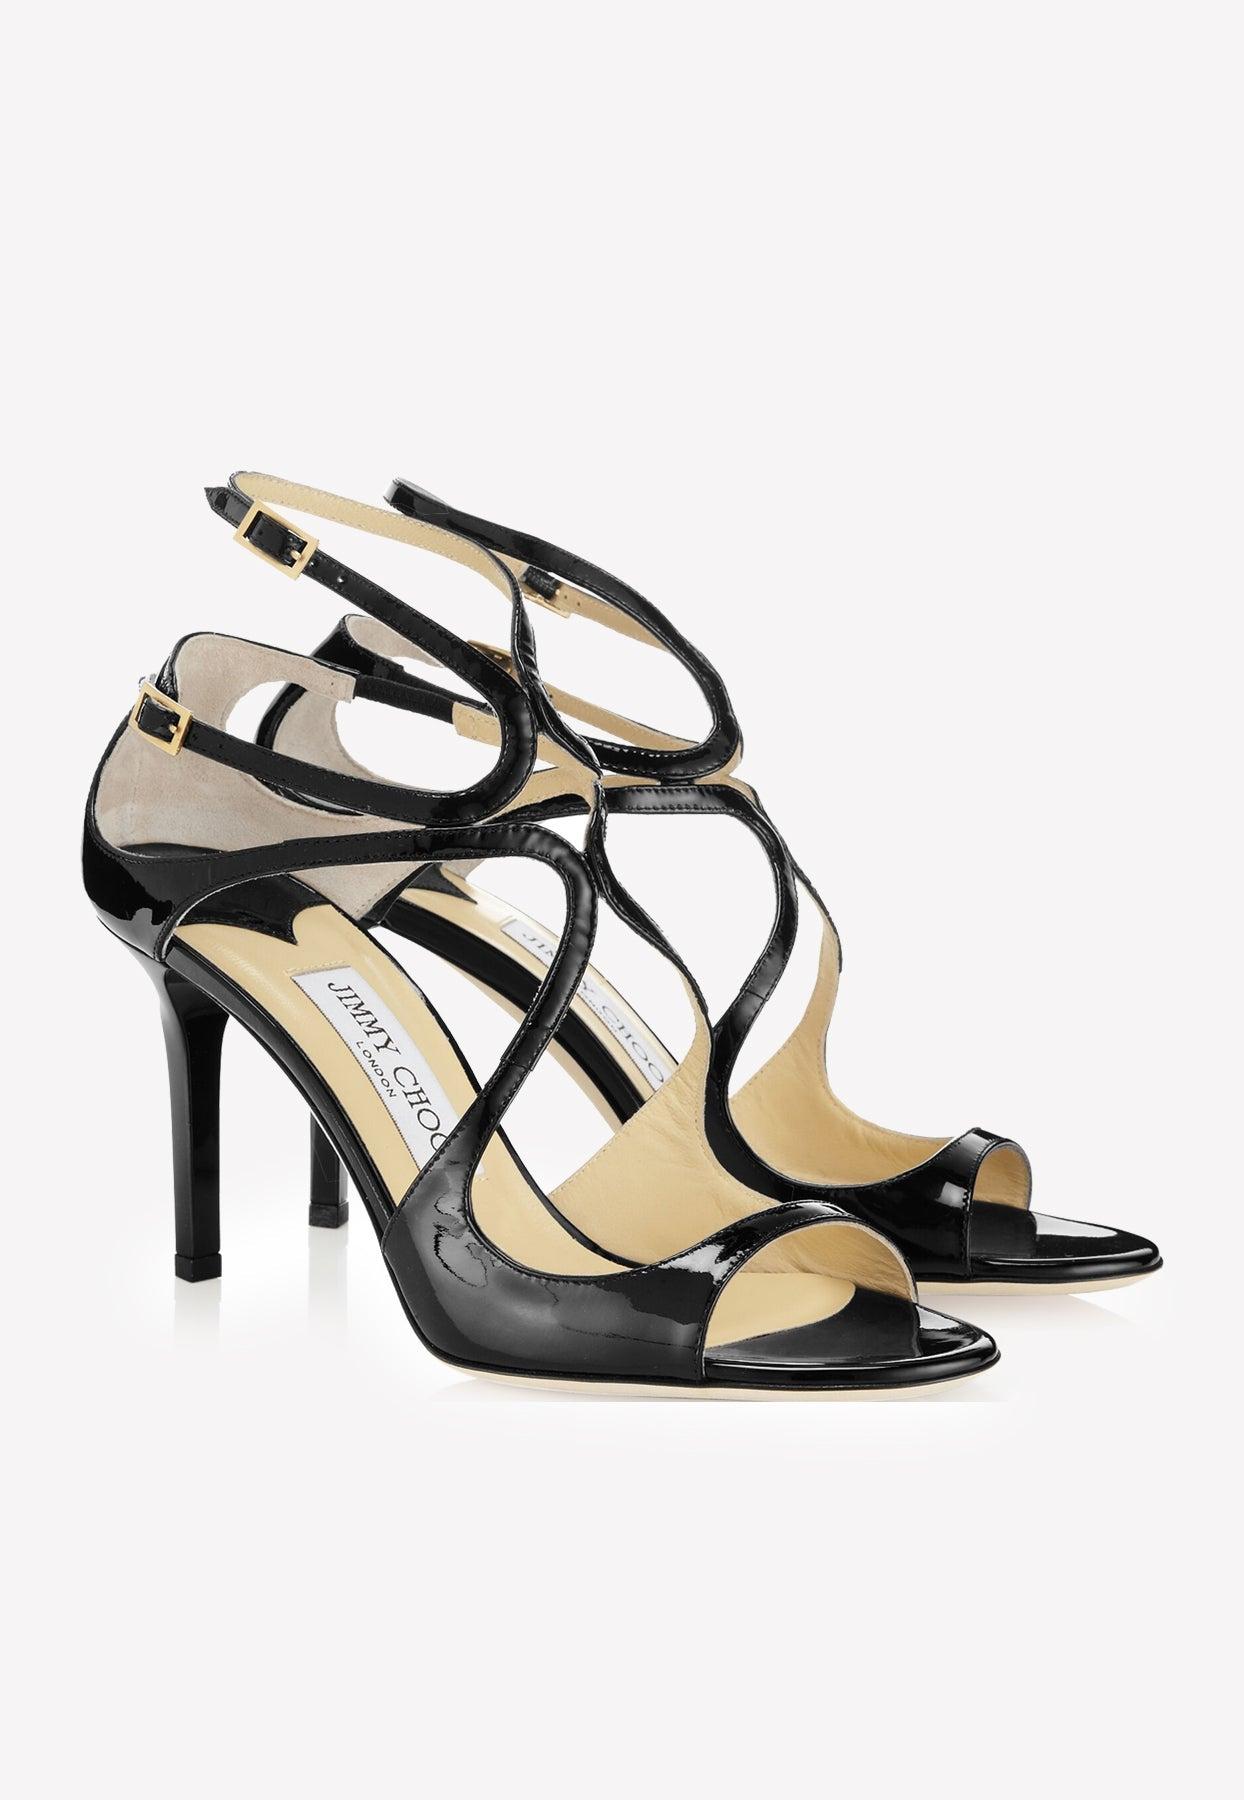 Jimmy Choo Ivette 85 Patent Leather Sandals With Wraparound Straps in Black  | Lyst